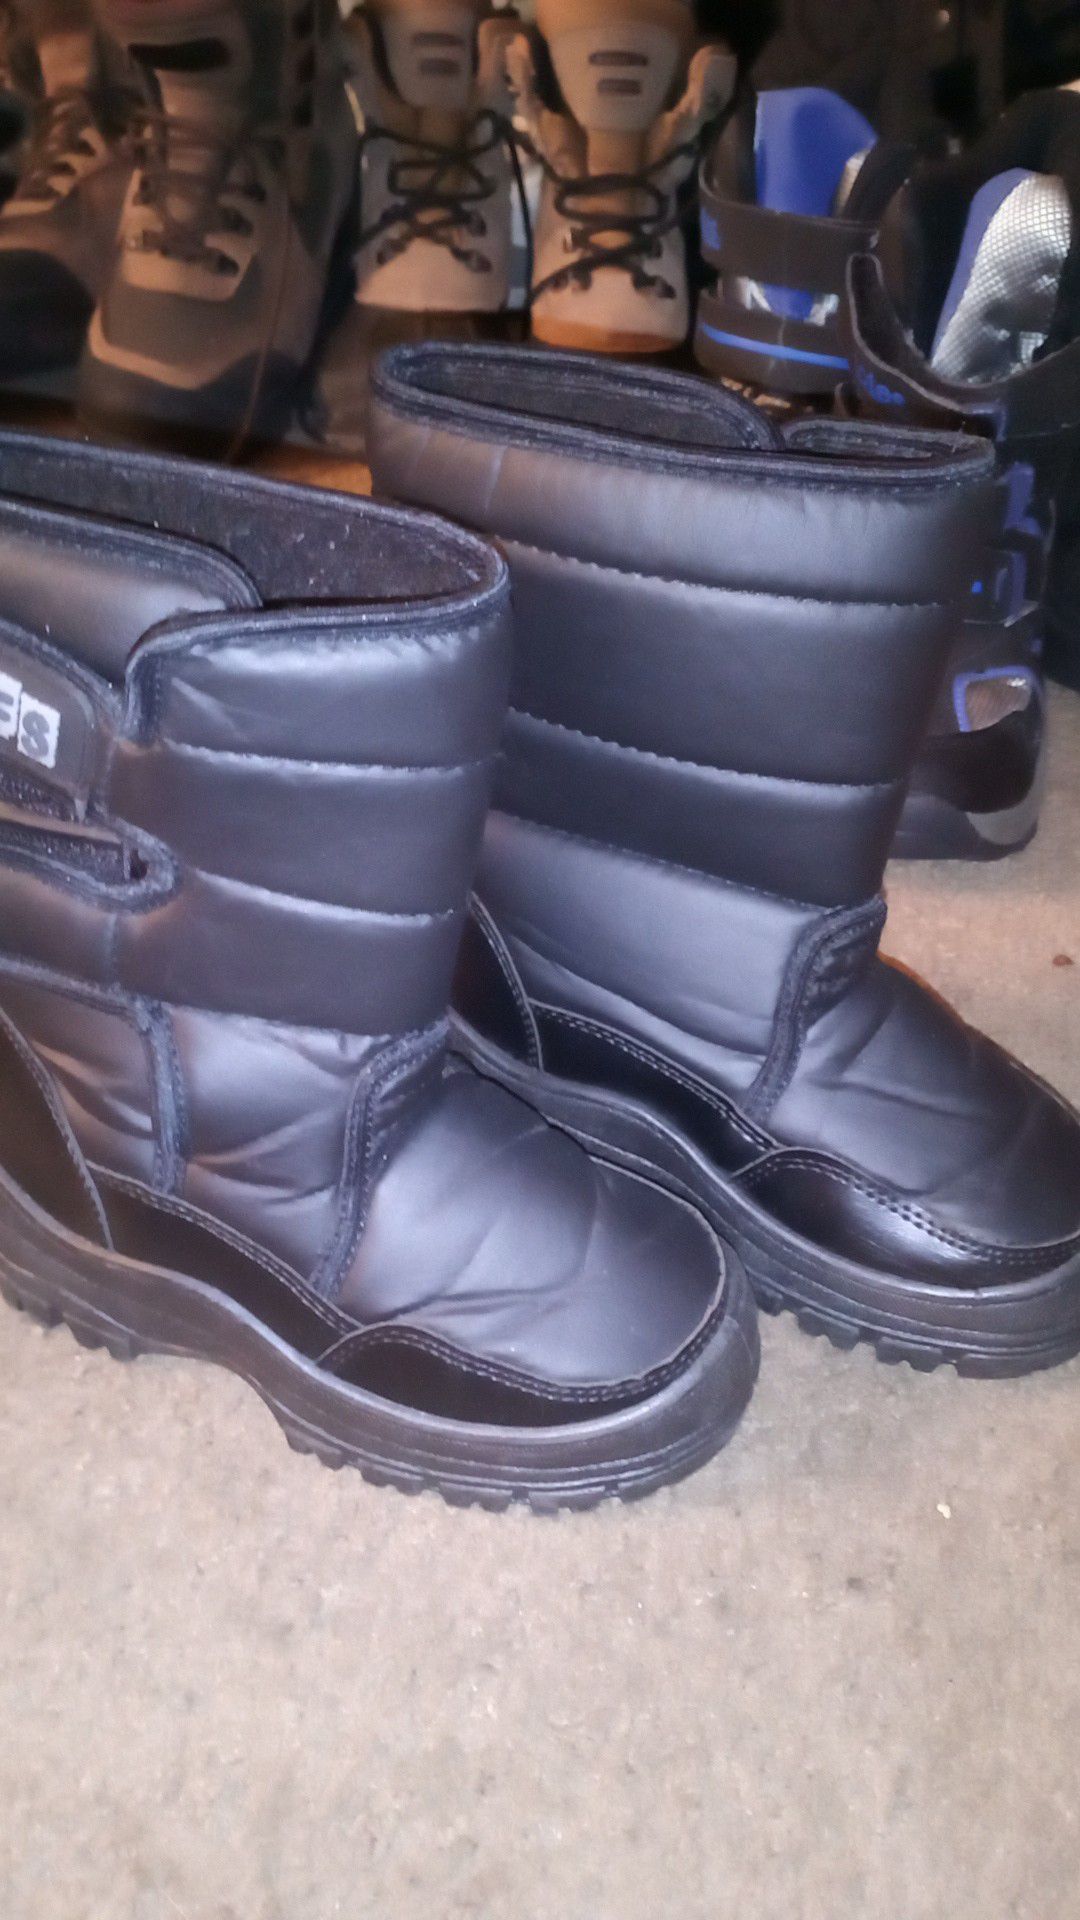 Snow boots made by wfs size 12 kids in brand new condition